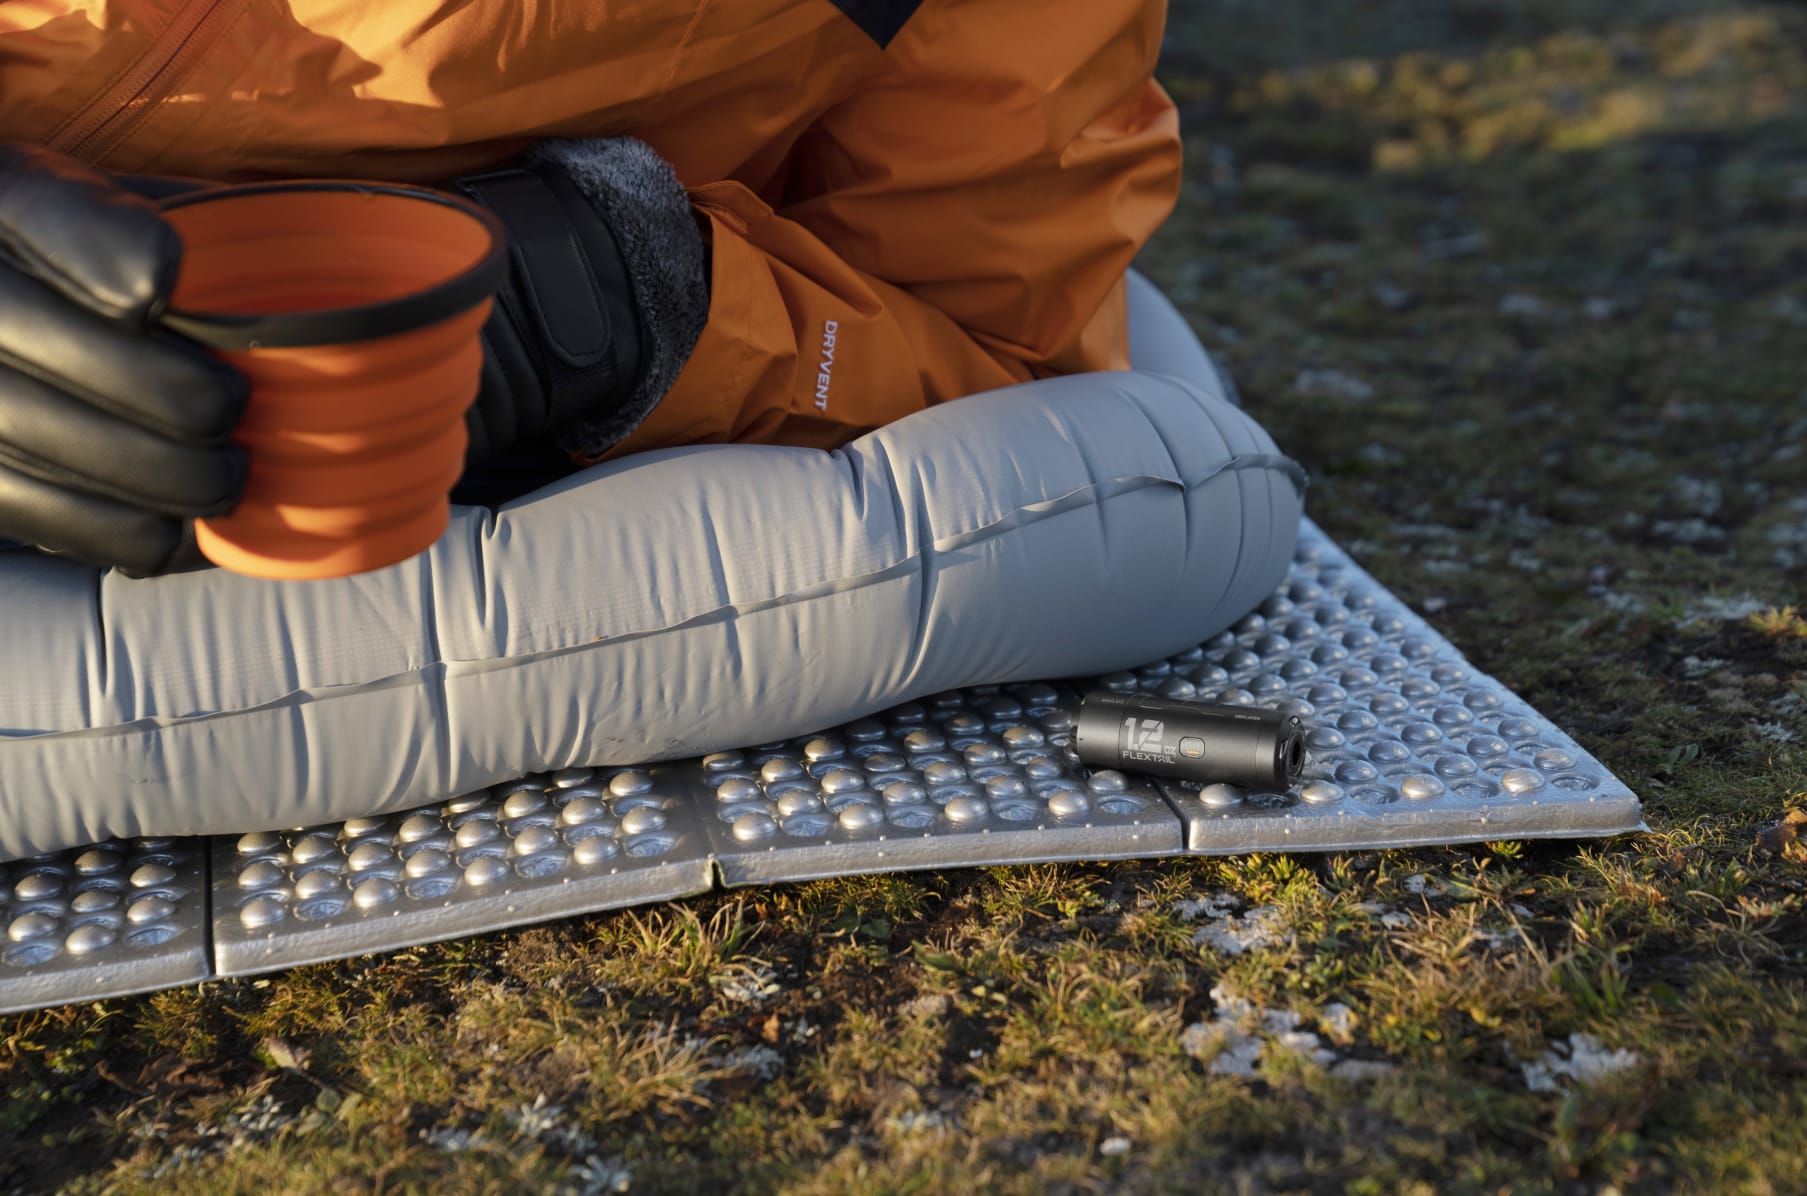 Track ZERO PUMP:World's Smallest Pump for Sleeping Pads's Indiegogo  campaign on BackerTracker